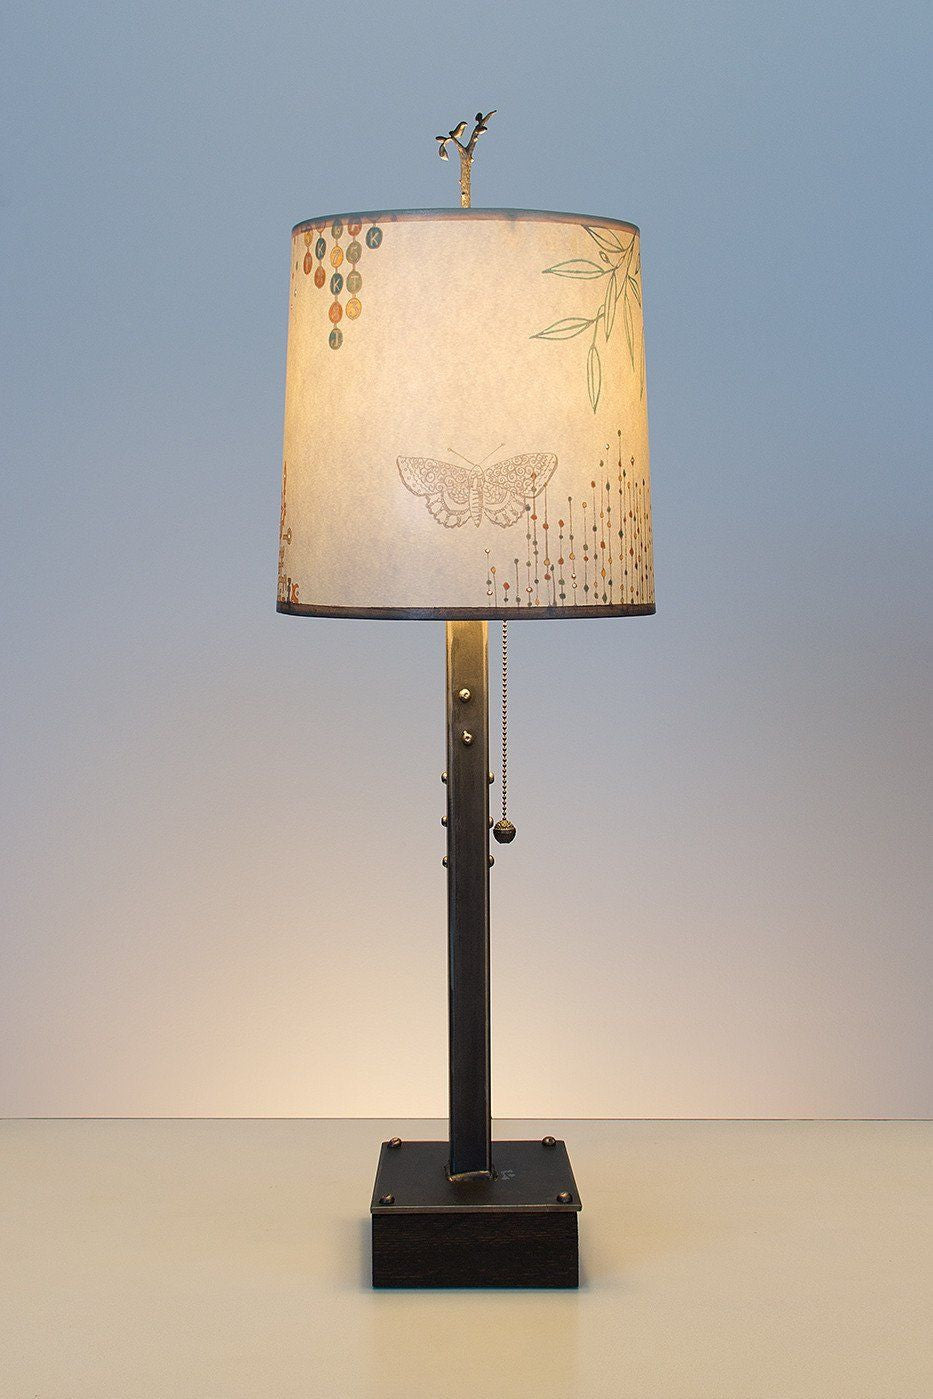 Janna Ugone &amp; Co Table Lamps Steel Table Lamp on Wood with Medium Drum Shade in Ecru Journey